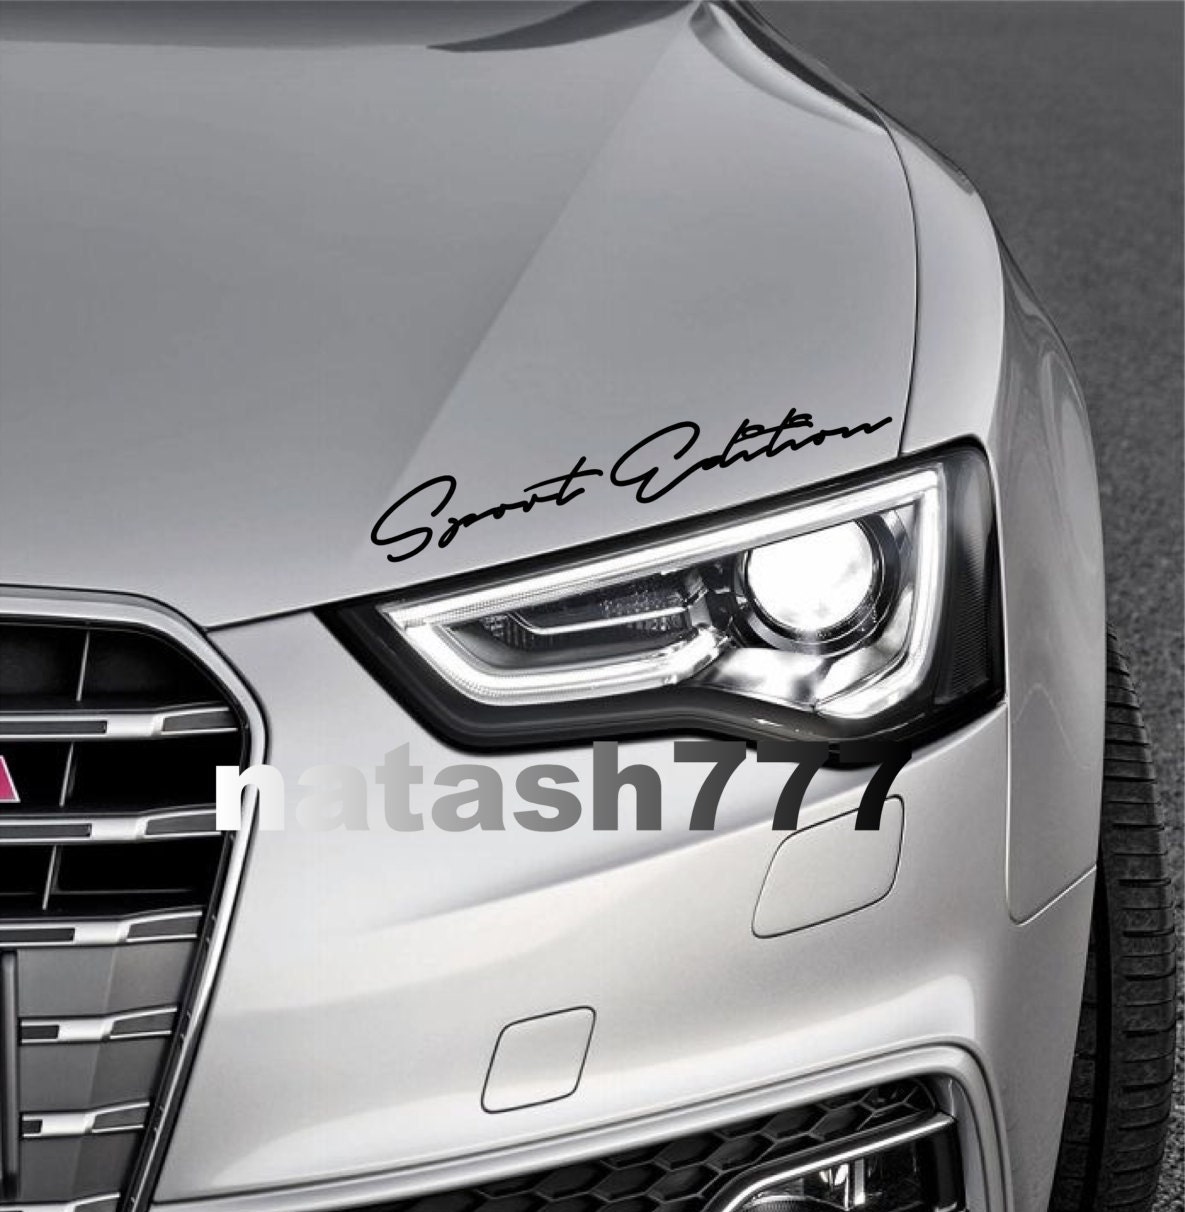 2 x Limited edition Audi Motorsport Decal Sticker compatible with Audi  models